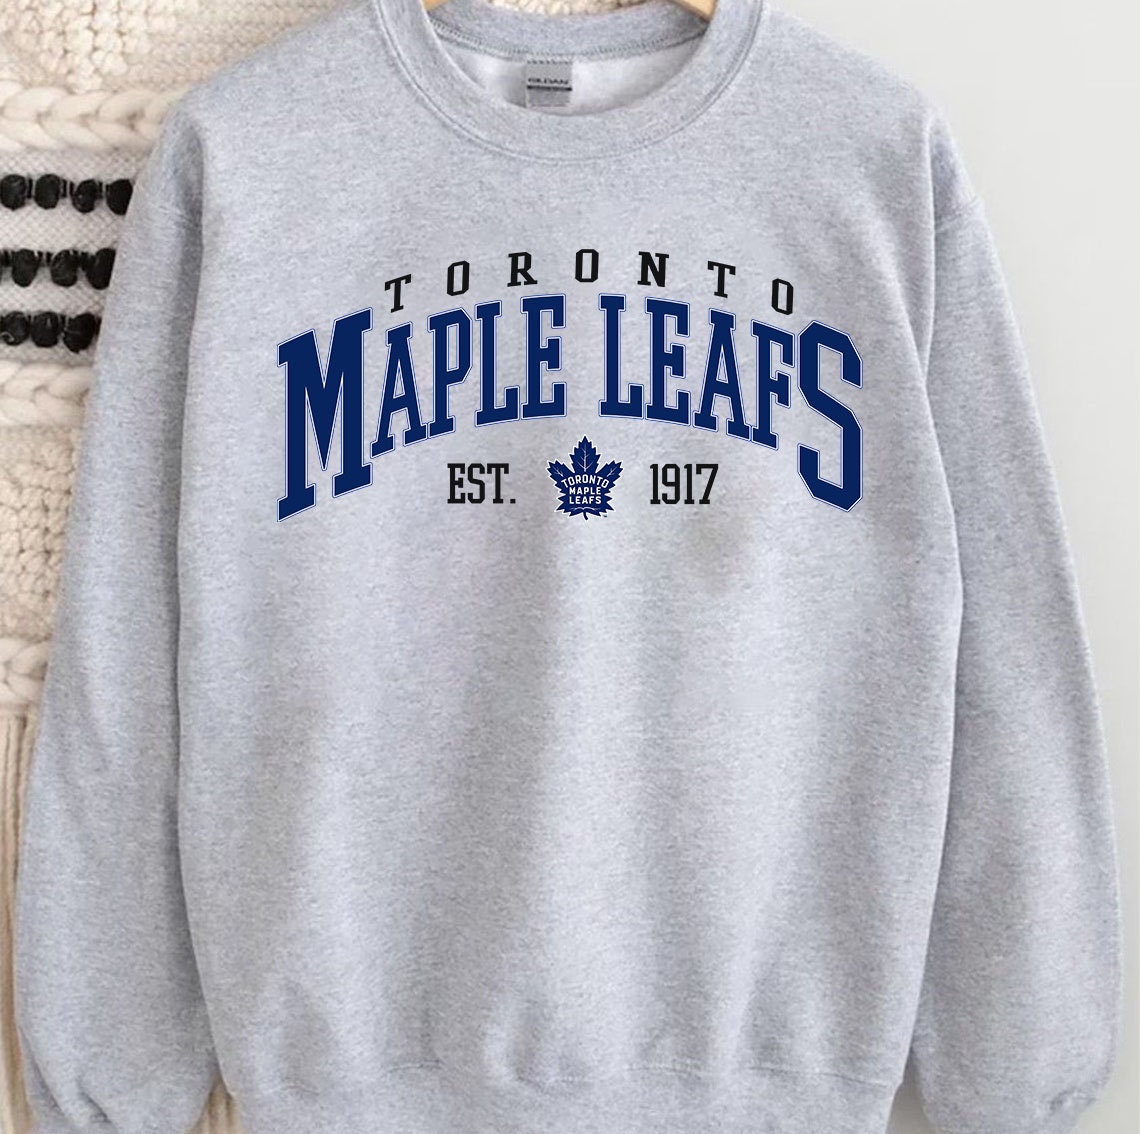 Antigua Toronto Maple Leafs Navy Blue Steamer Long Sleeve 1/4 Zip Pullover, Navy Blue, 95% Polyester / 5% SPANDEX, Size S, Rally House